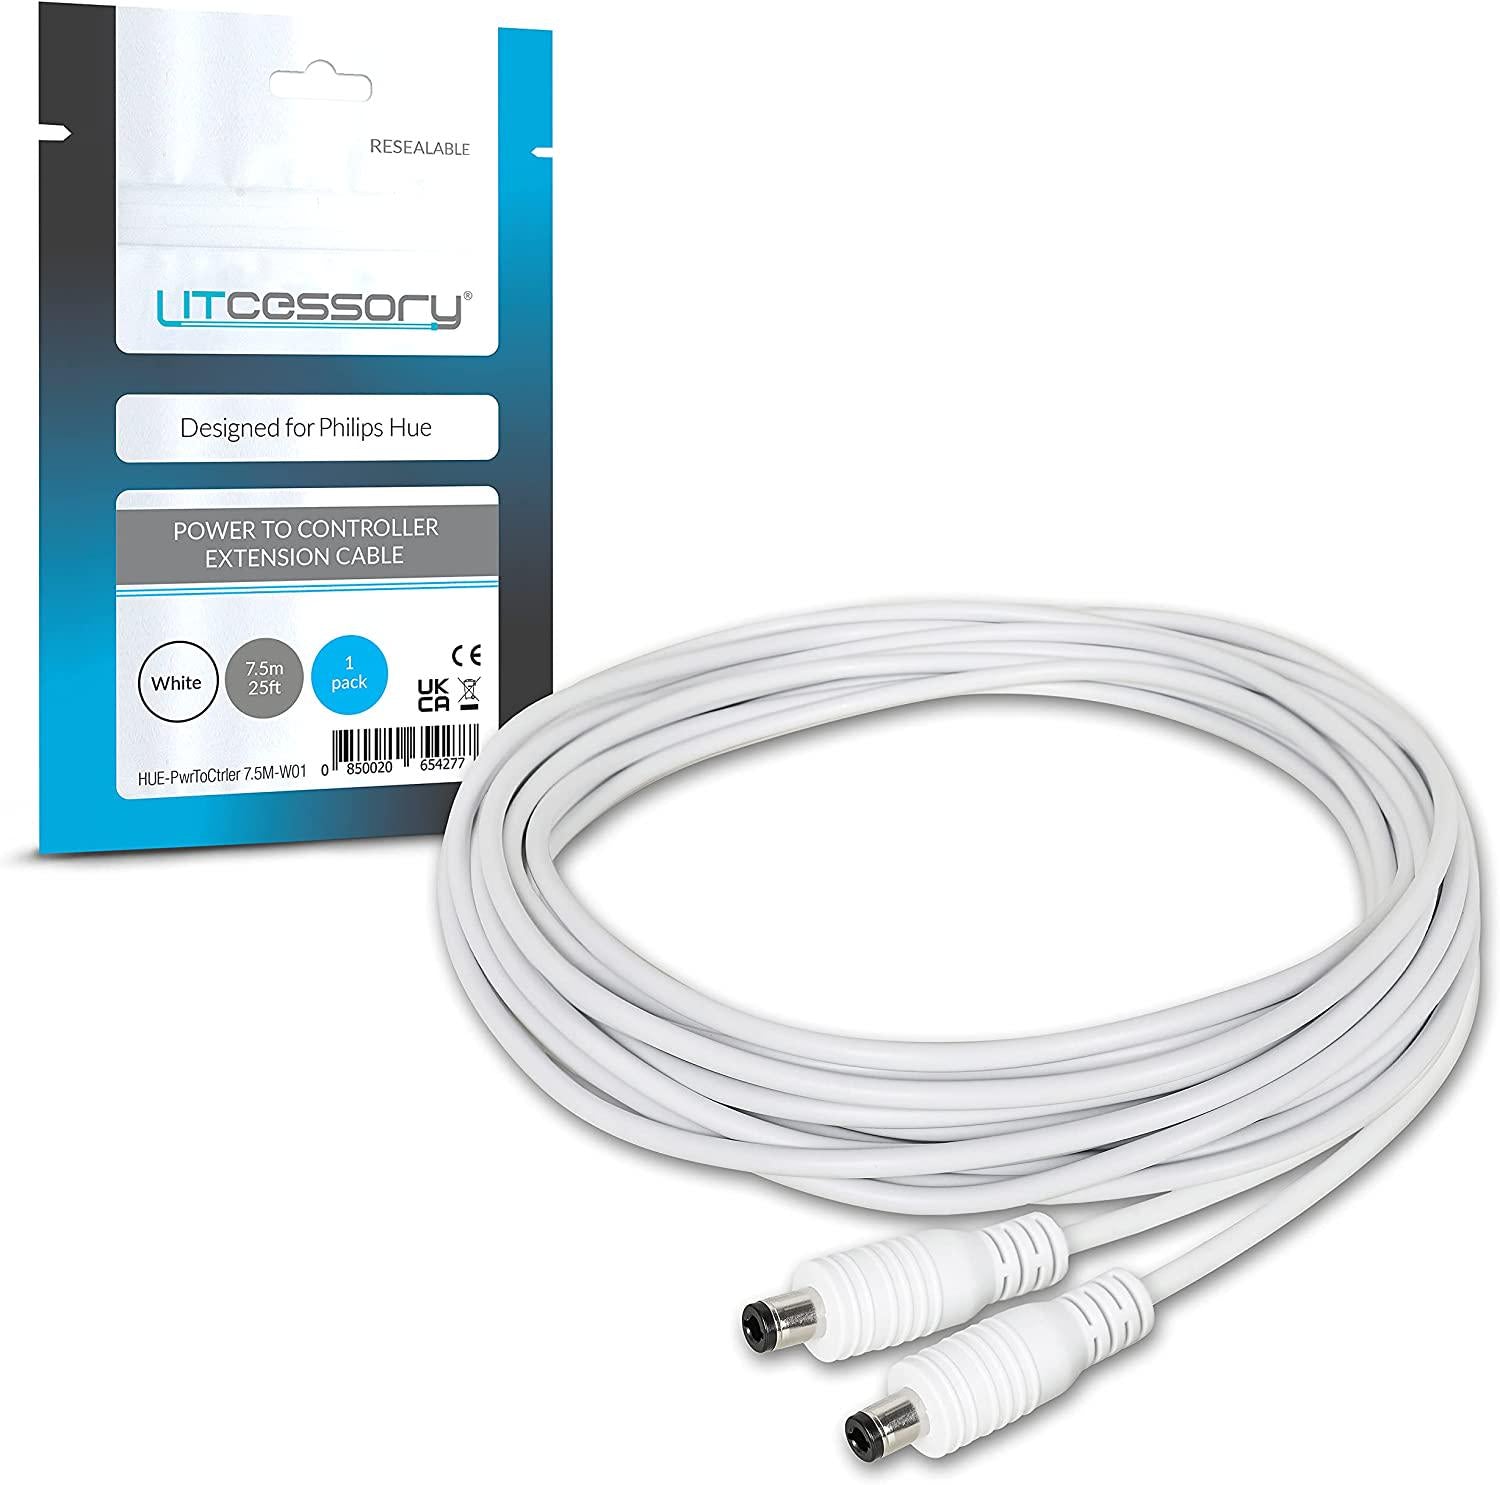 Litcessory, Litcessory Power to Controller Extension Cable for Philips Hue Lightstrip Plus (7.5m, White)